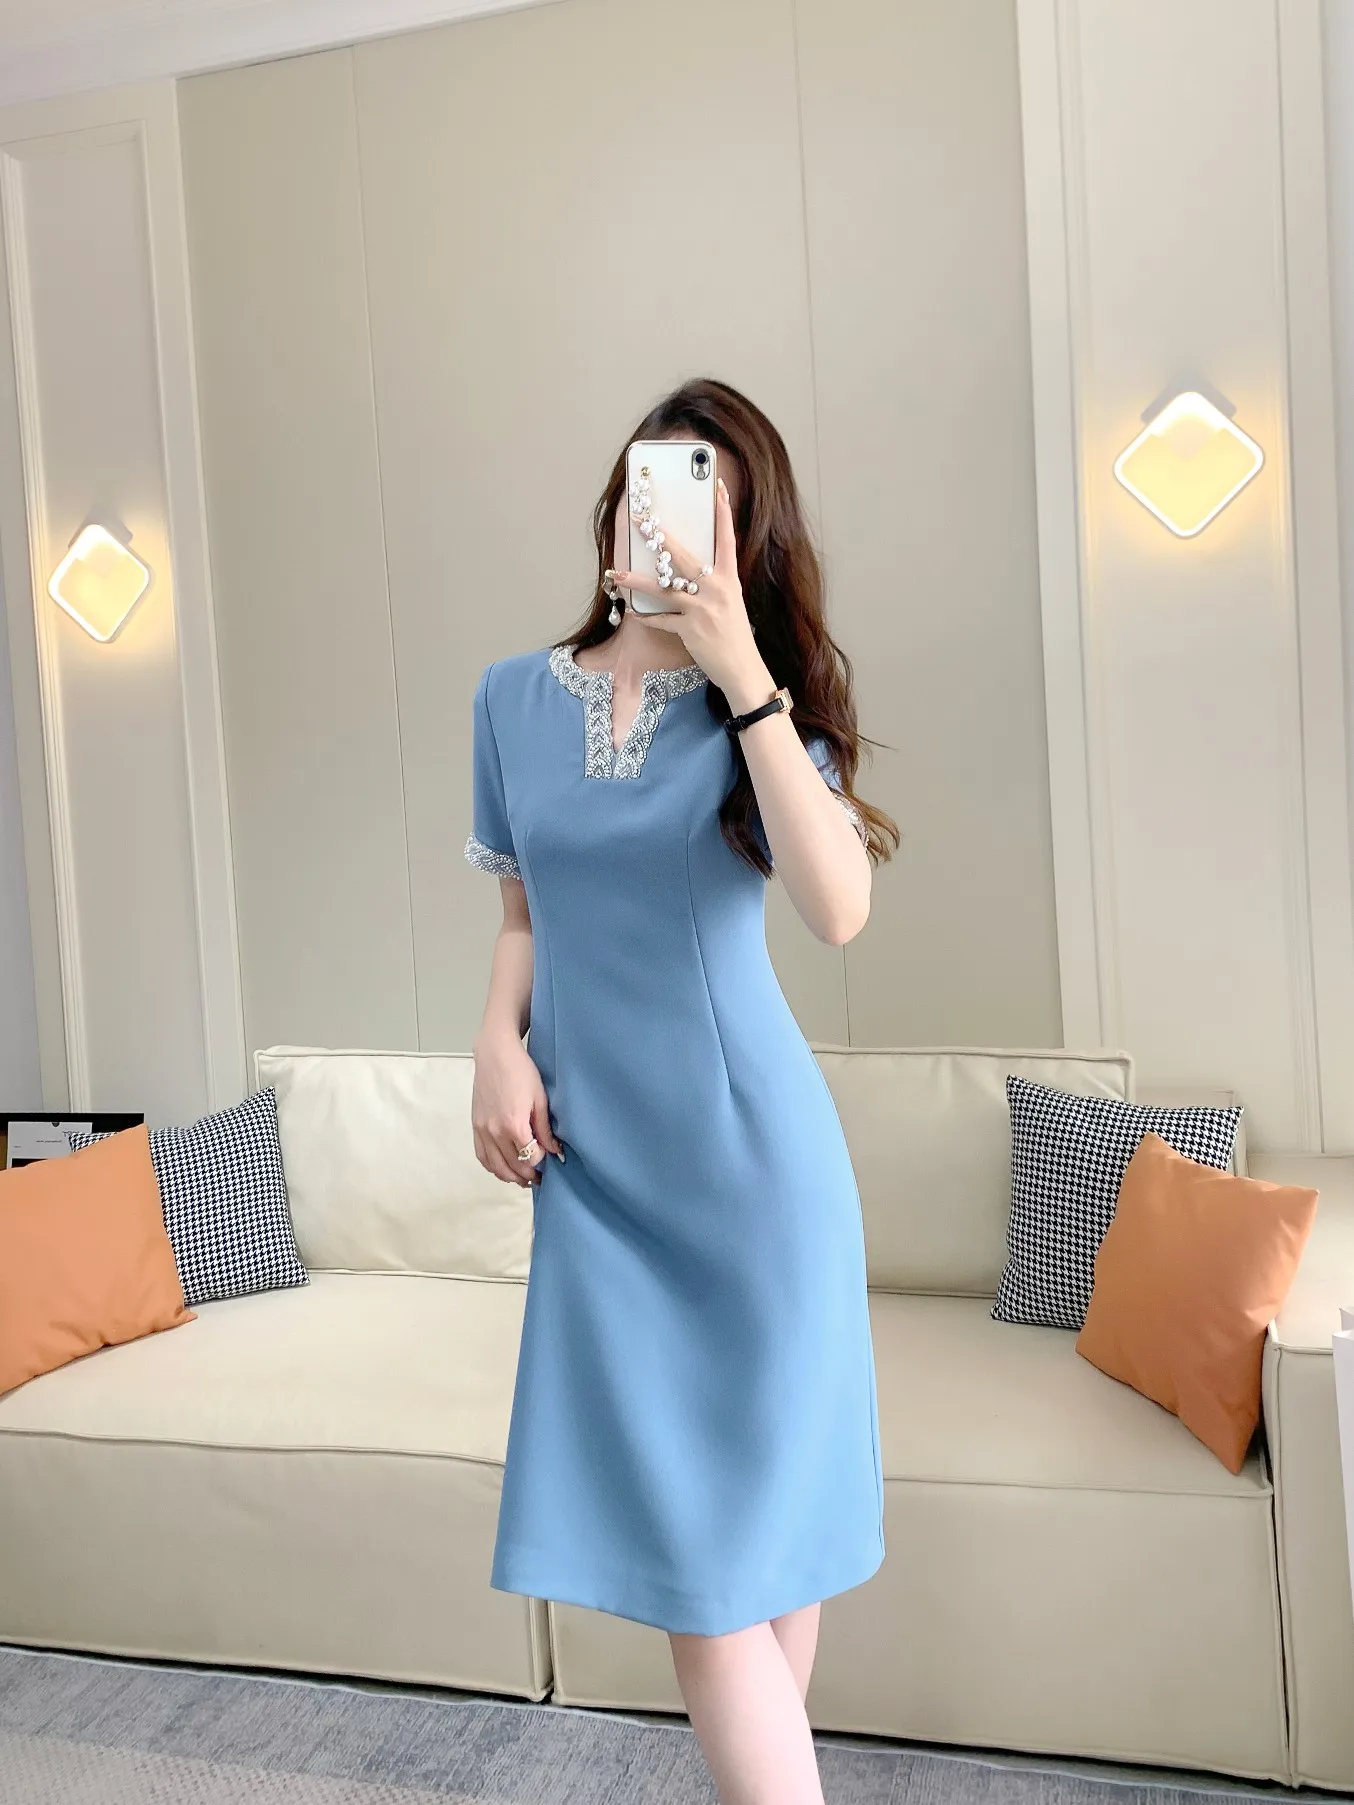 2023 spring and summer women's clothing fashion new Decorative V-neck Dress 0526